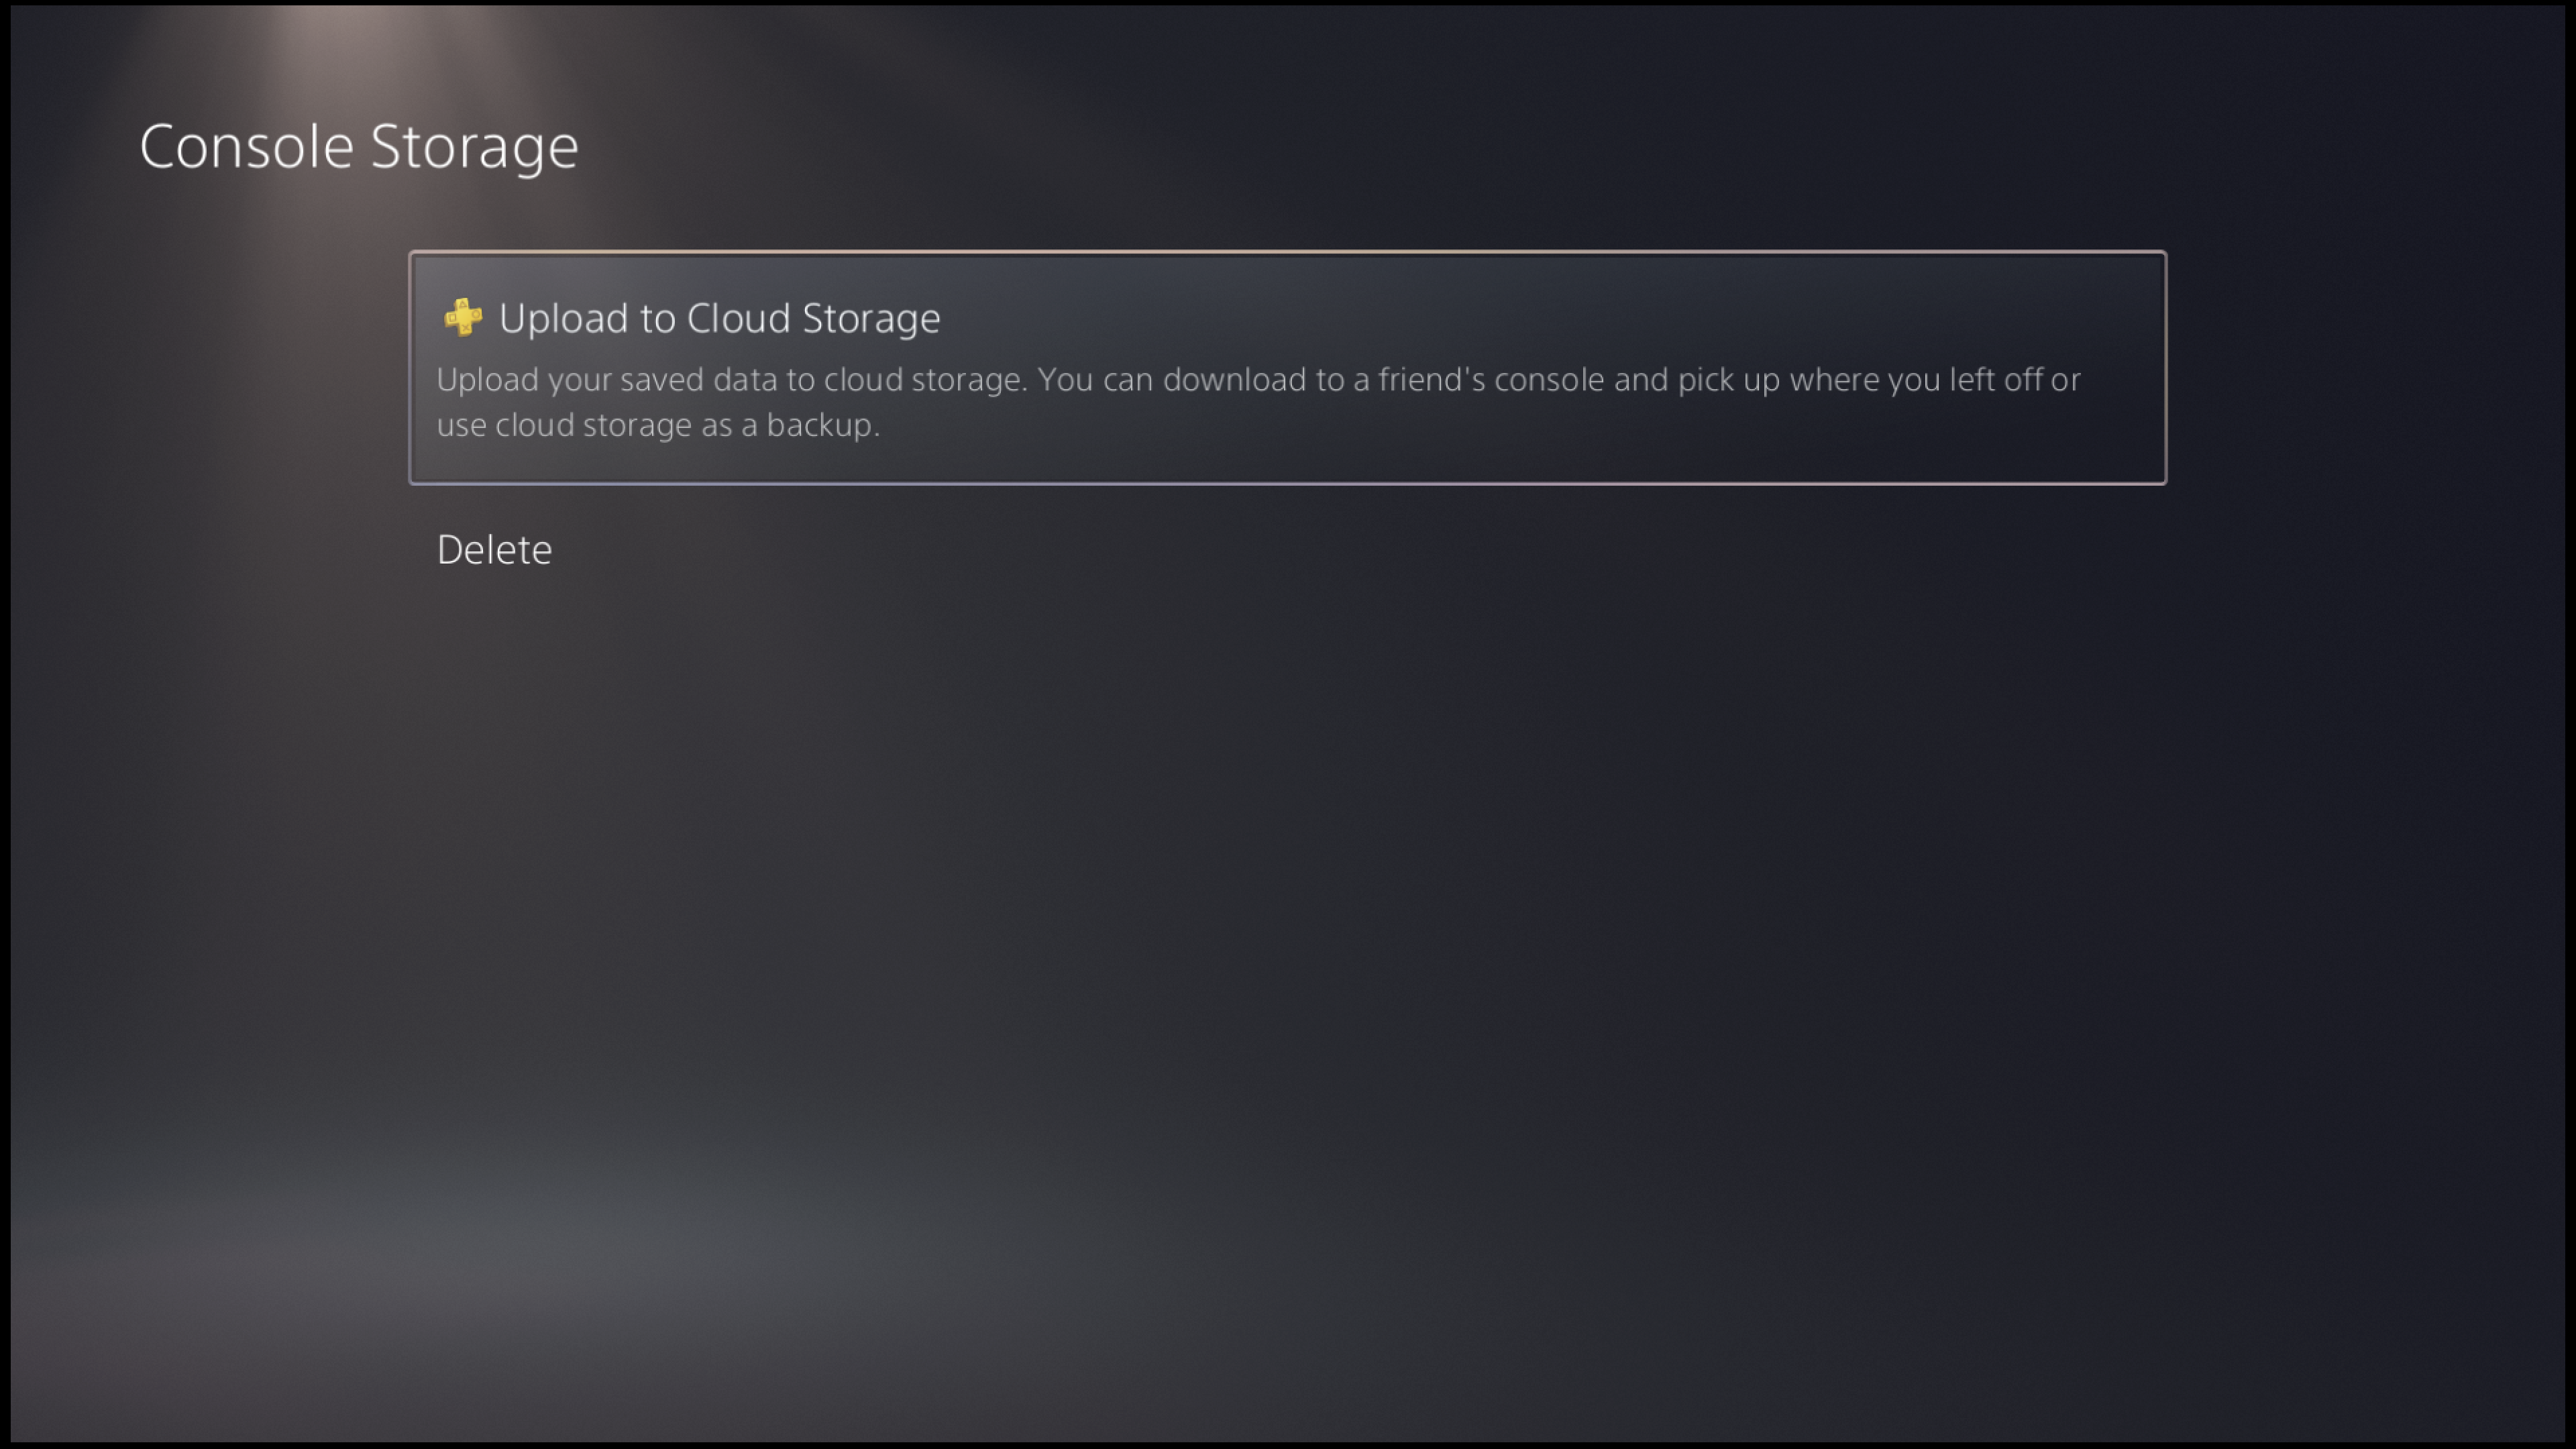 PS5 upload saved data to cloud